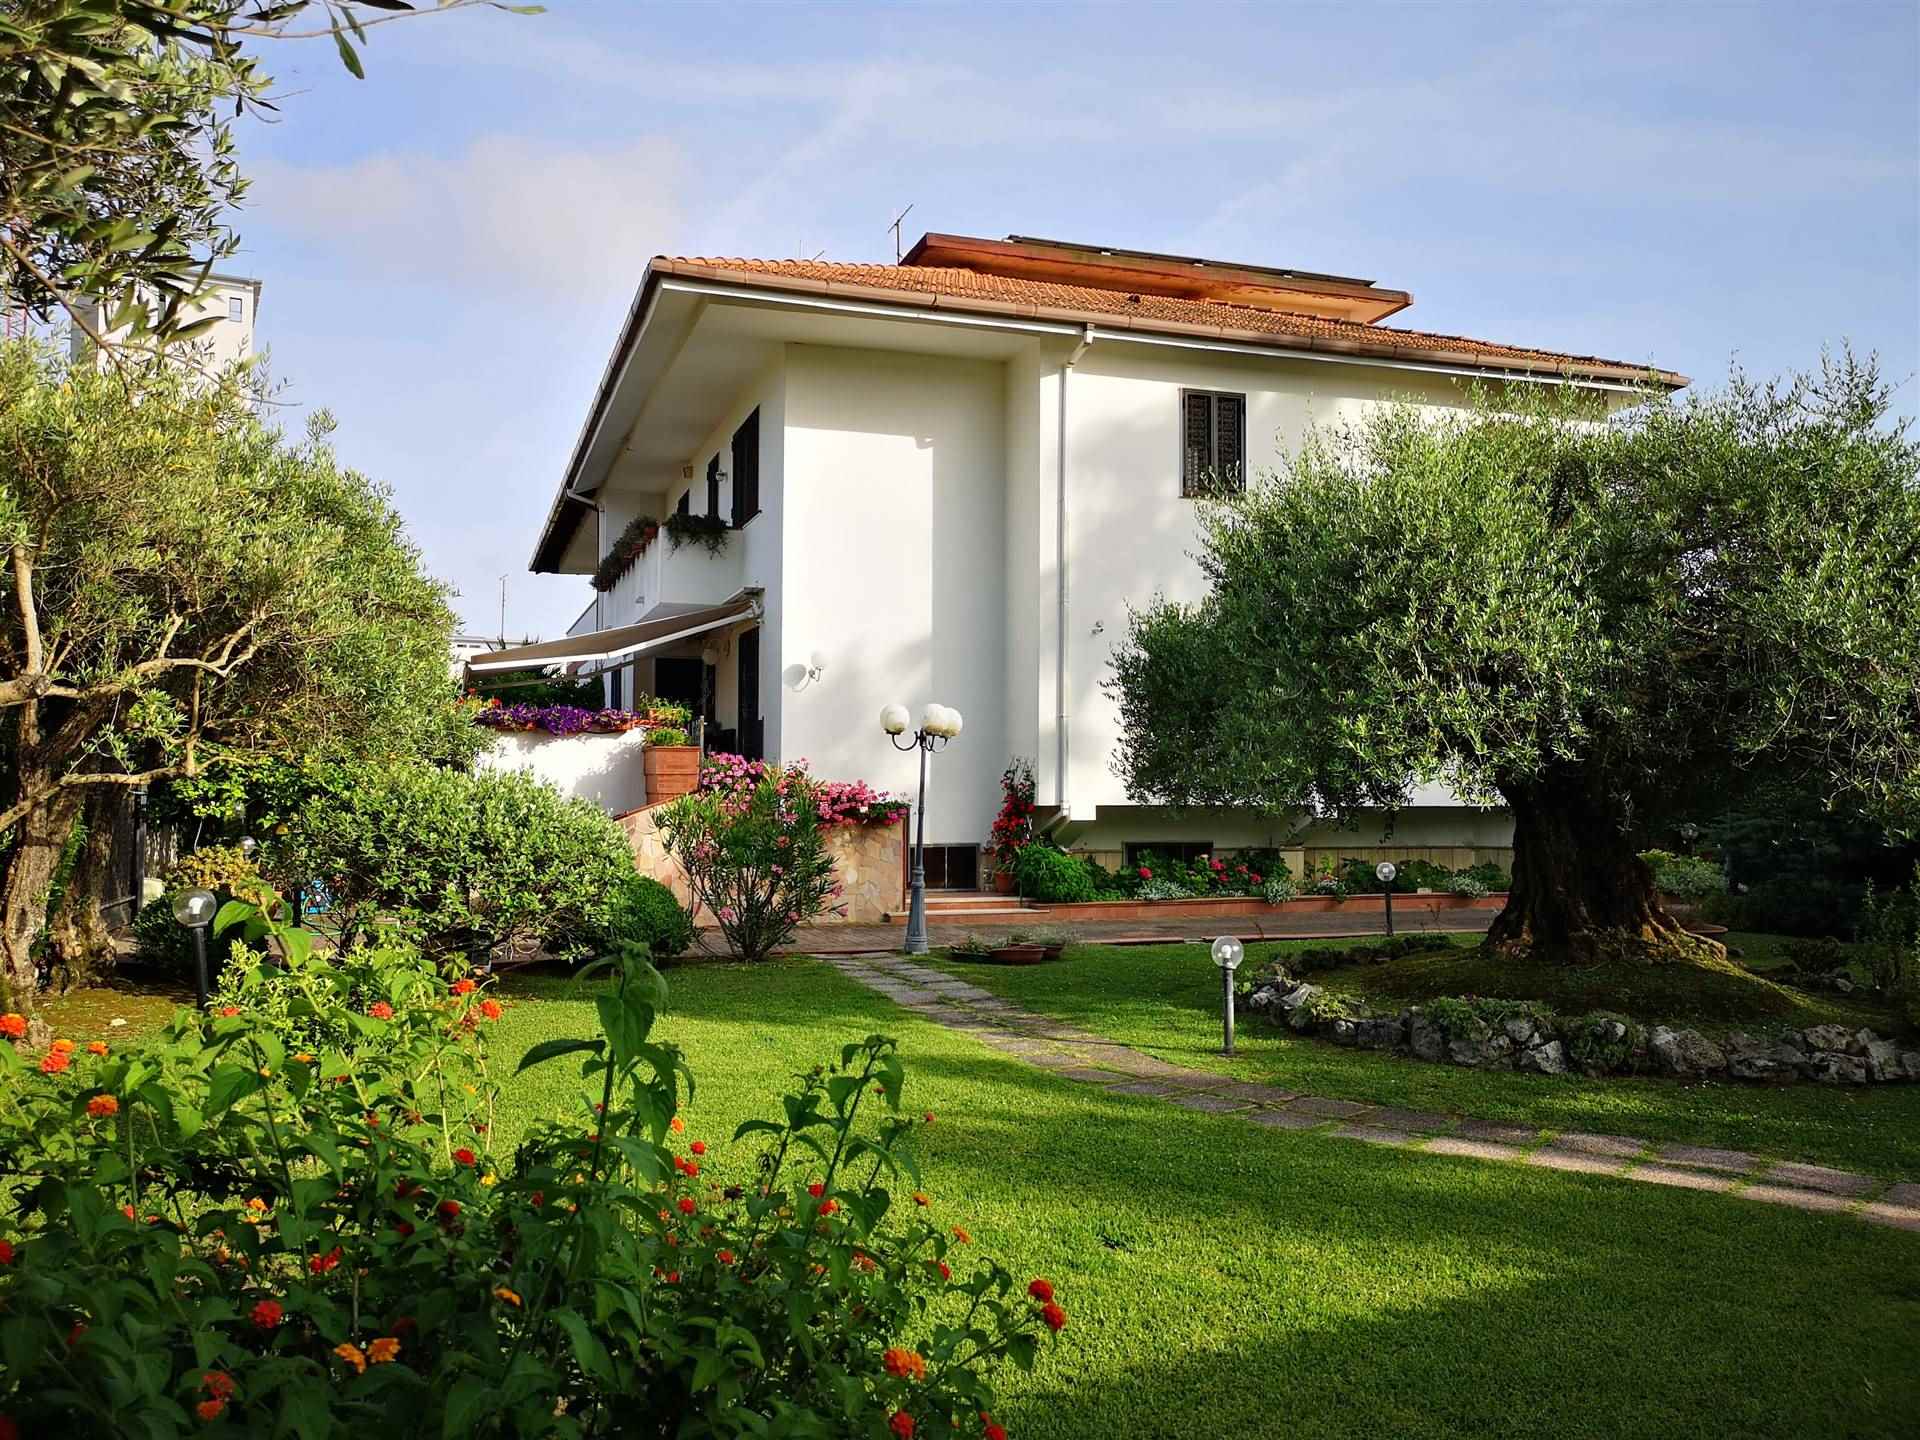 SAN LEONARDO / ARECHI / MIGLIARO, SALERNO, Villa for sale of 230 Sq. mt., Good condition, Heating Individual heating system, composed by: 8 Rooms, 